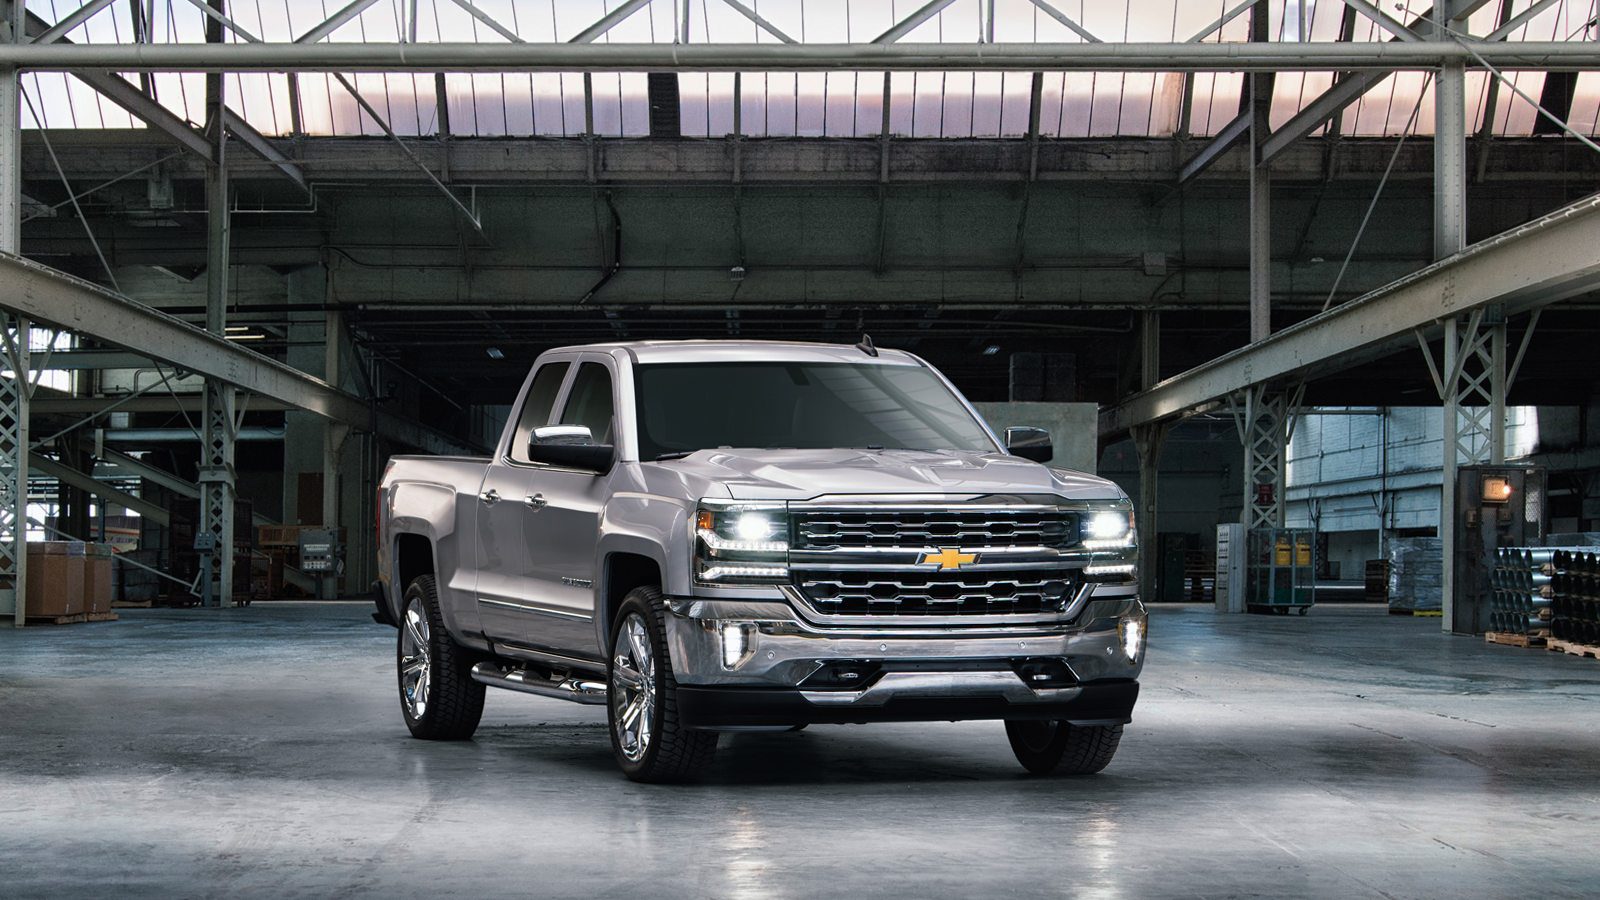 2- Chevrolet Silverado Top-10 Best-selling Vehicles in the USA to date for 2017